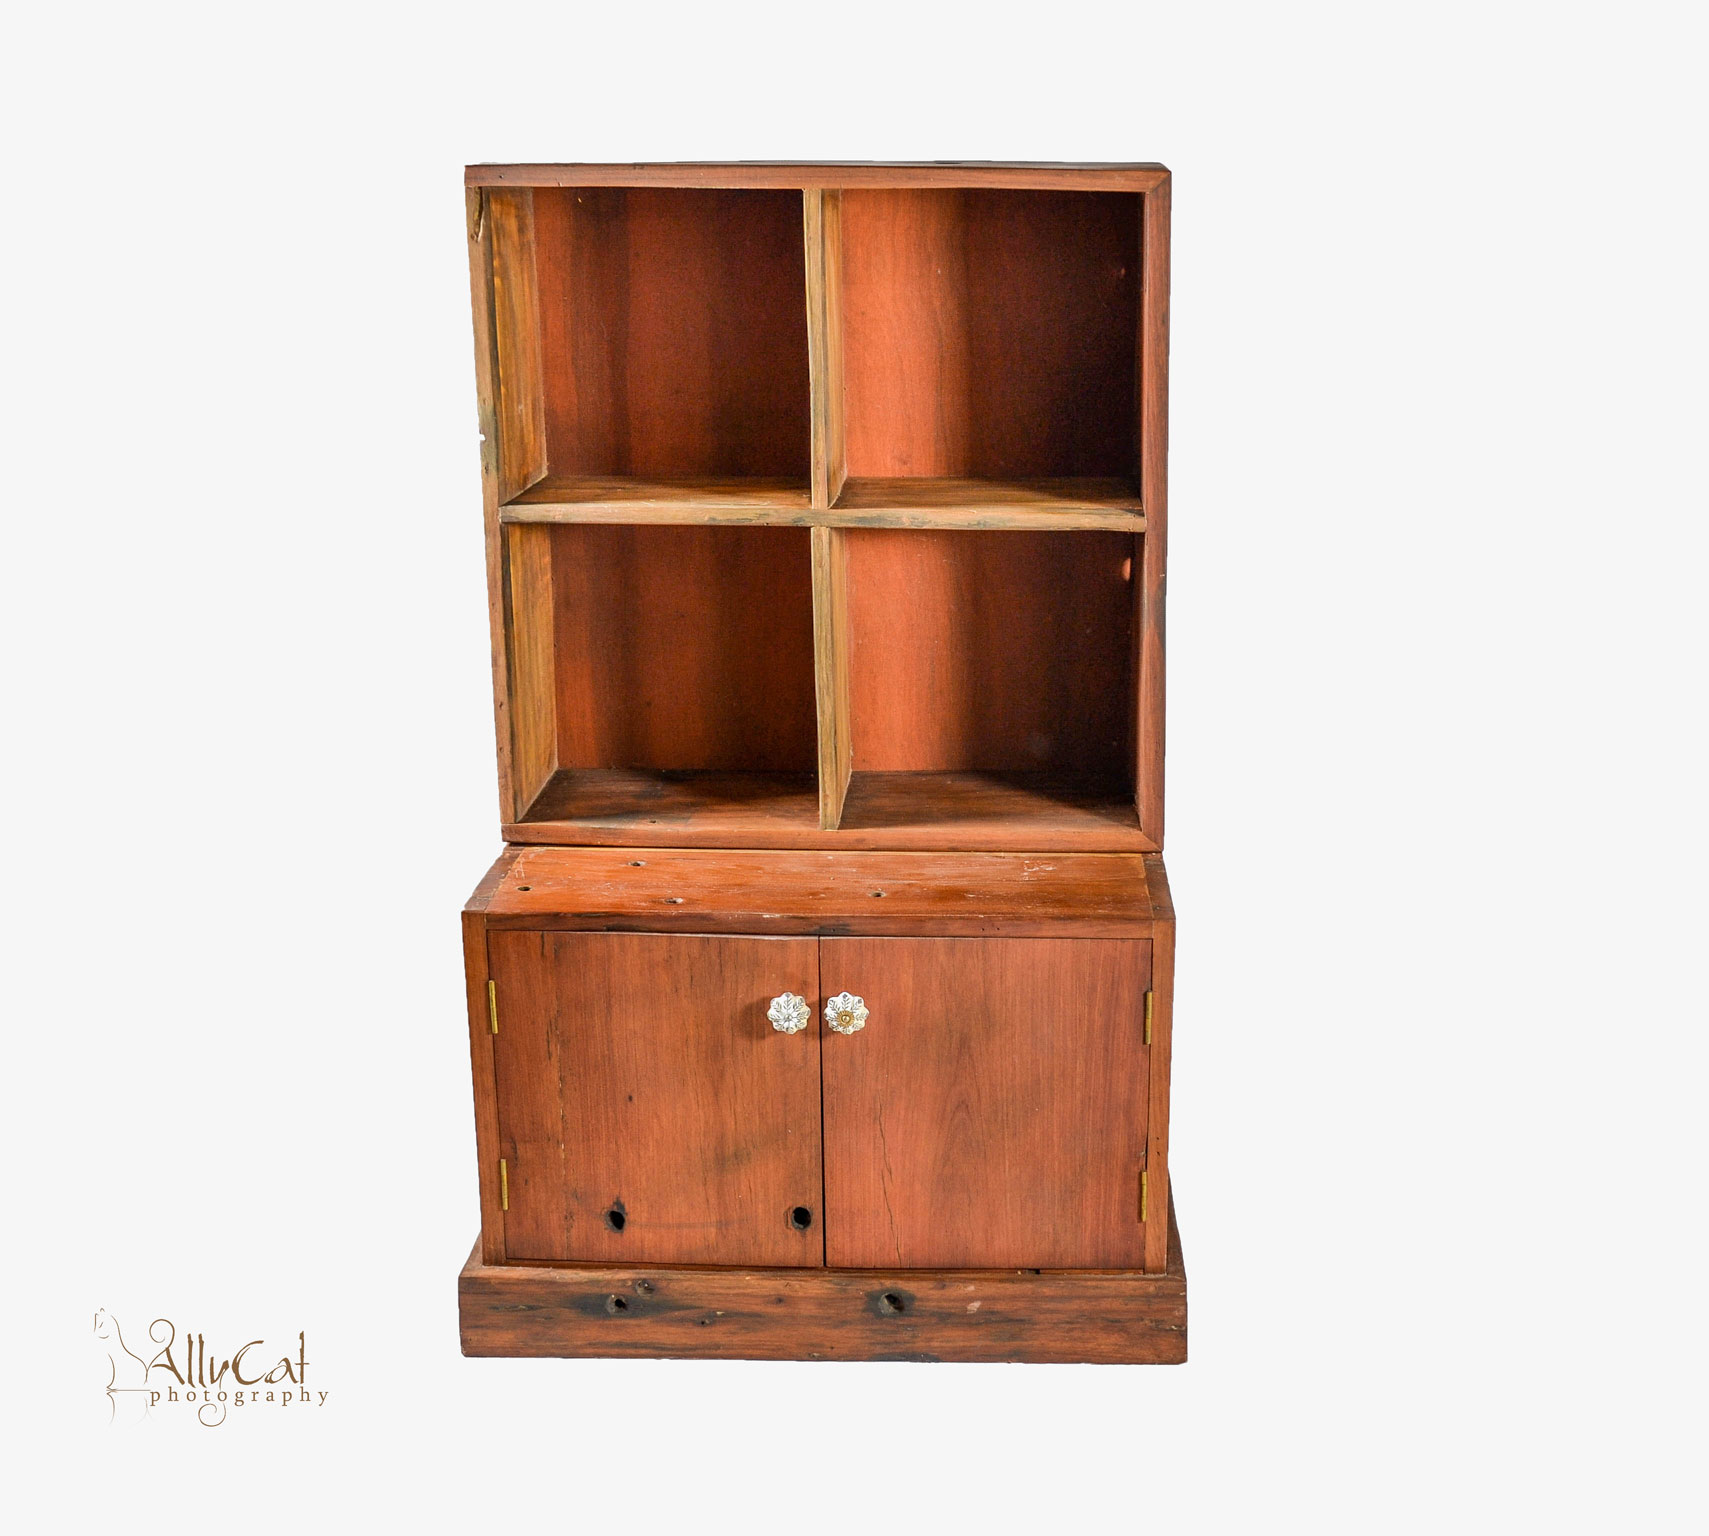 Dhow Wood Cupboard - Two Piece